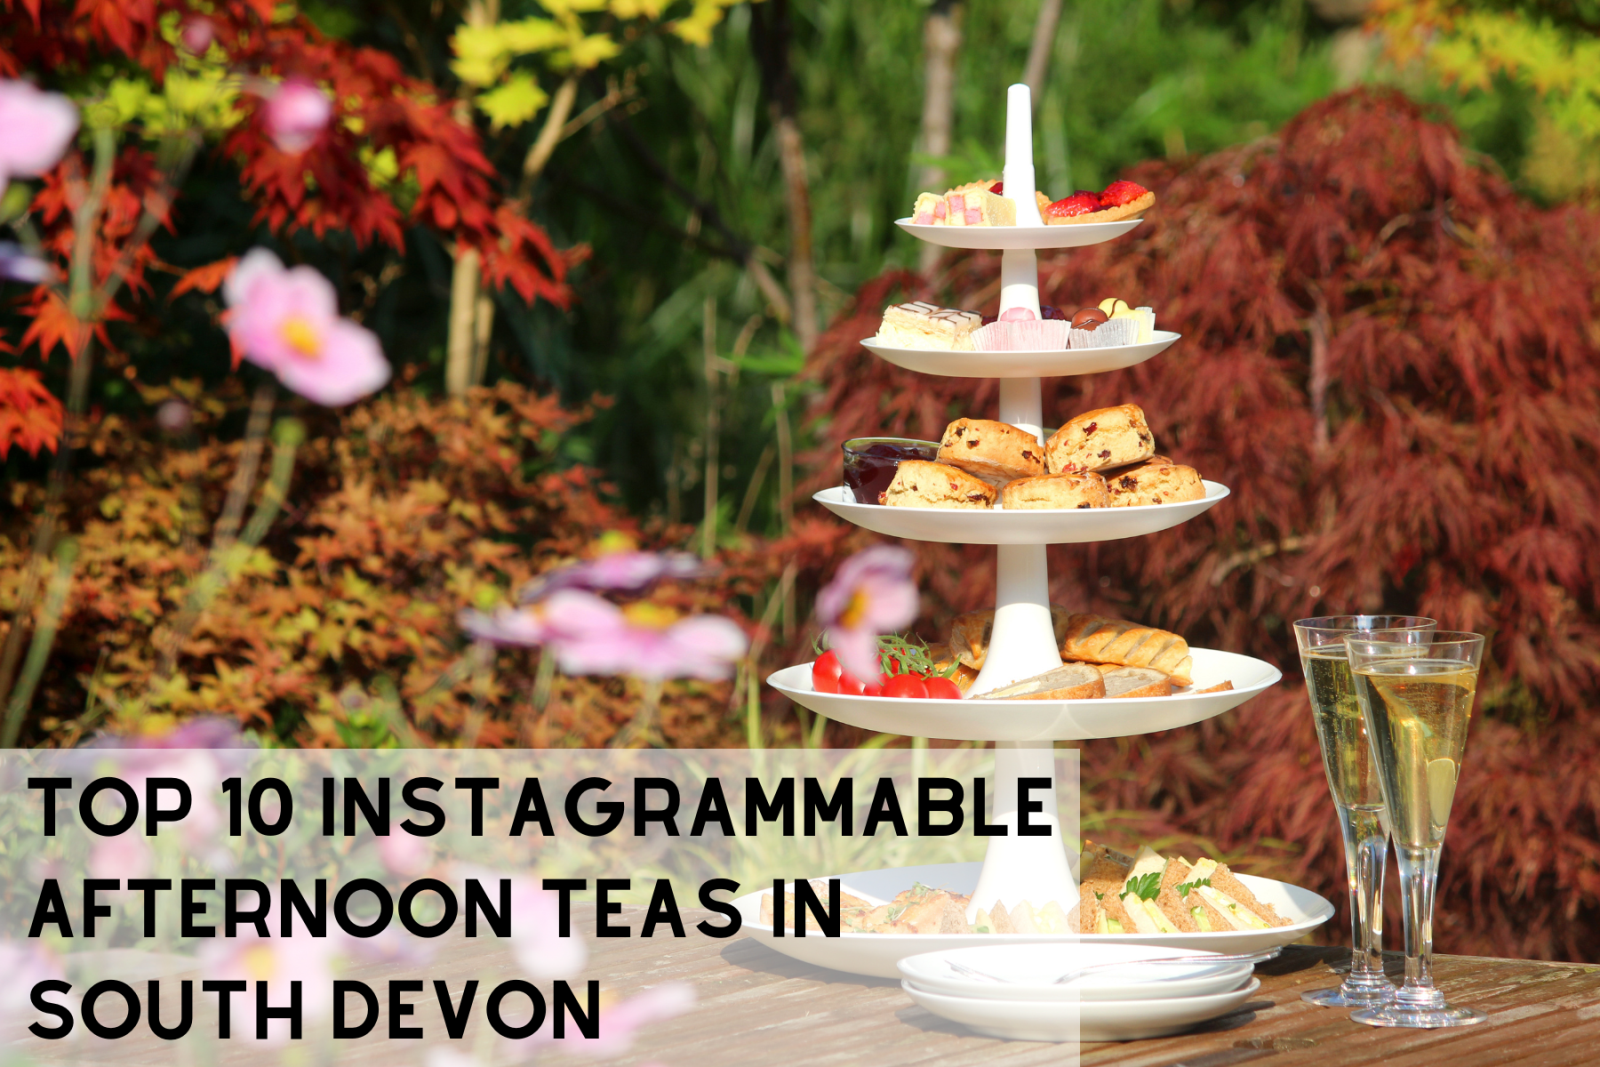 Top 10 instagrammable Afternoon teas in South Devon